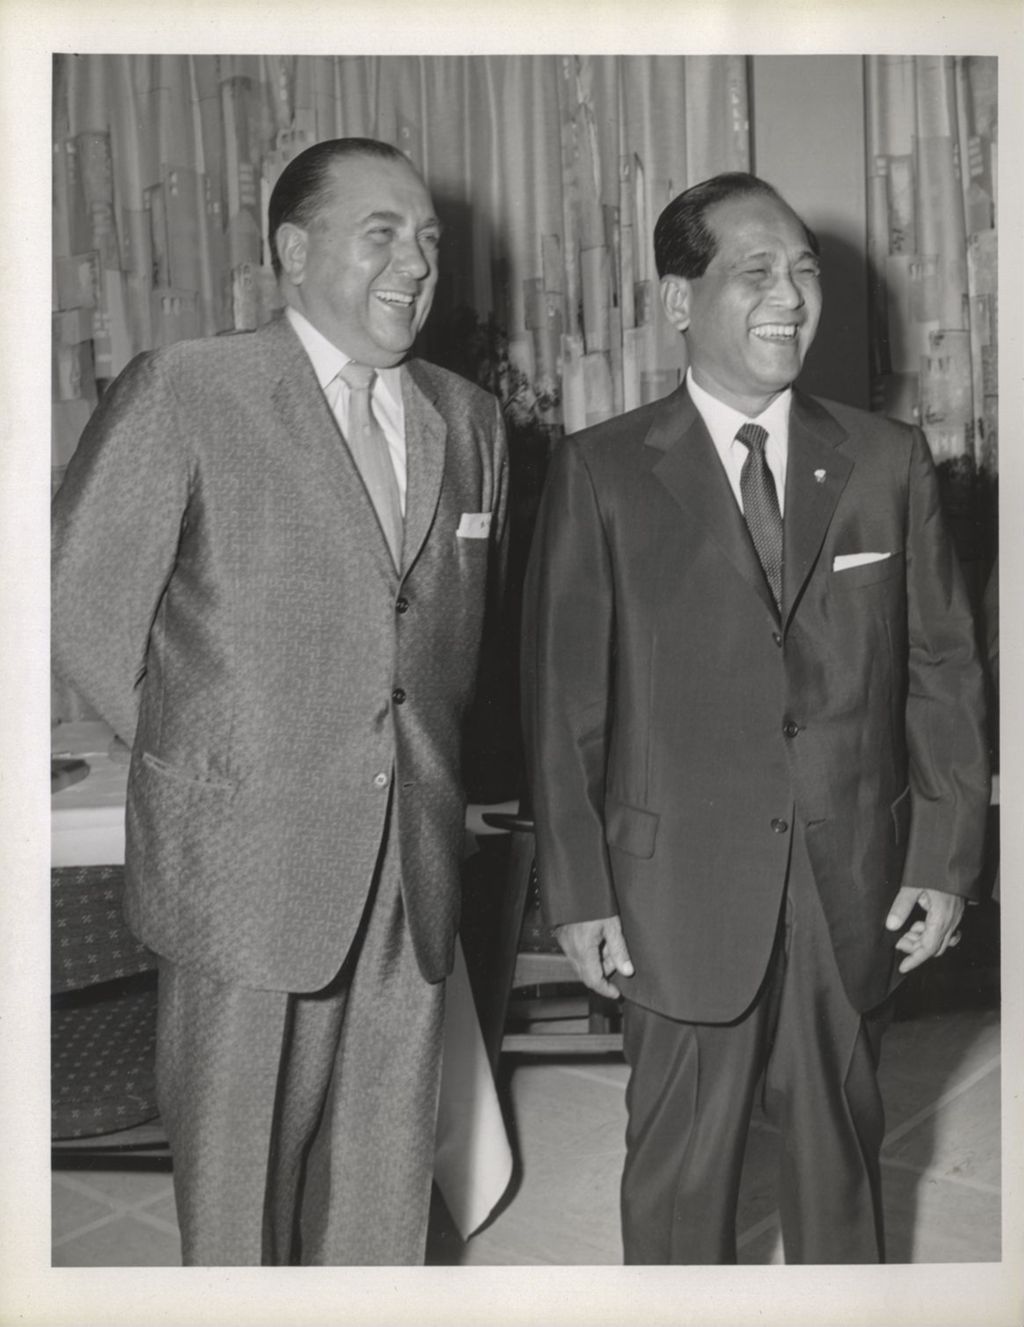 Miniature of Richard J. Daley and an Asian man laughing